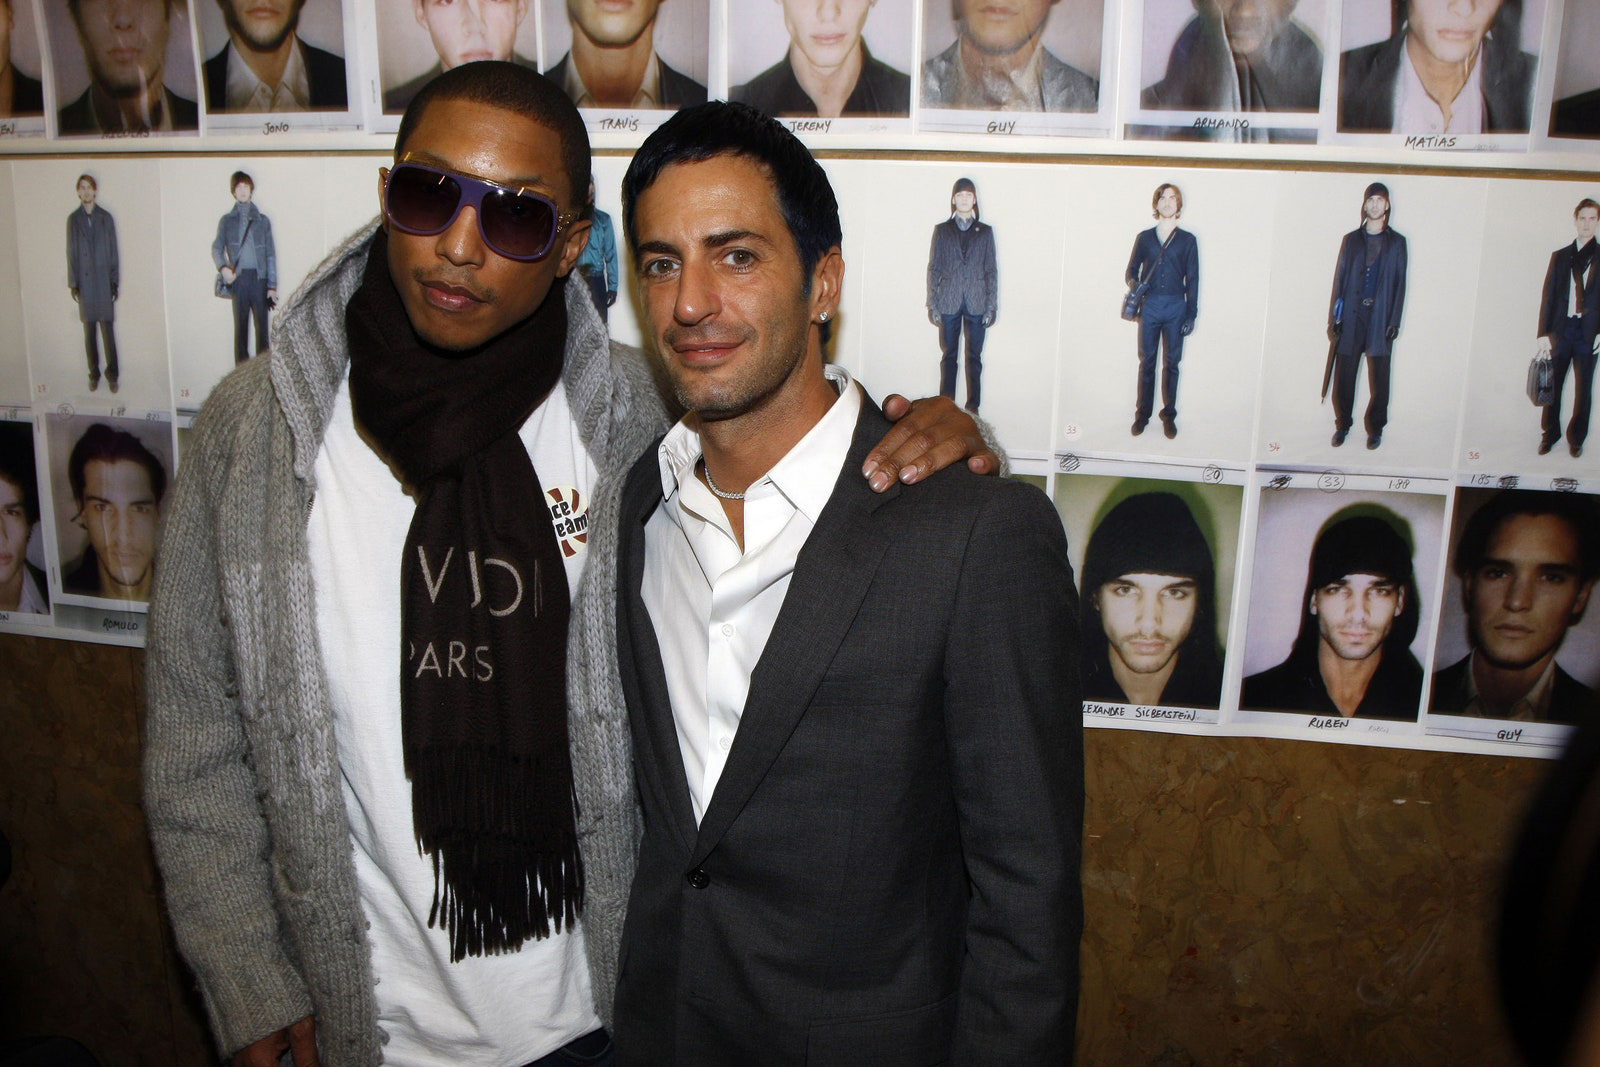 Pharrell Williams first collaborated with Louis Vuitton back in 2004, thanks to Marc Jacobs. Pictured backstage at a Louis Vuitton men’s show in 2008.